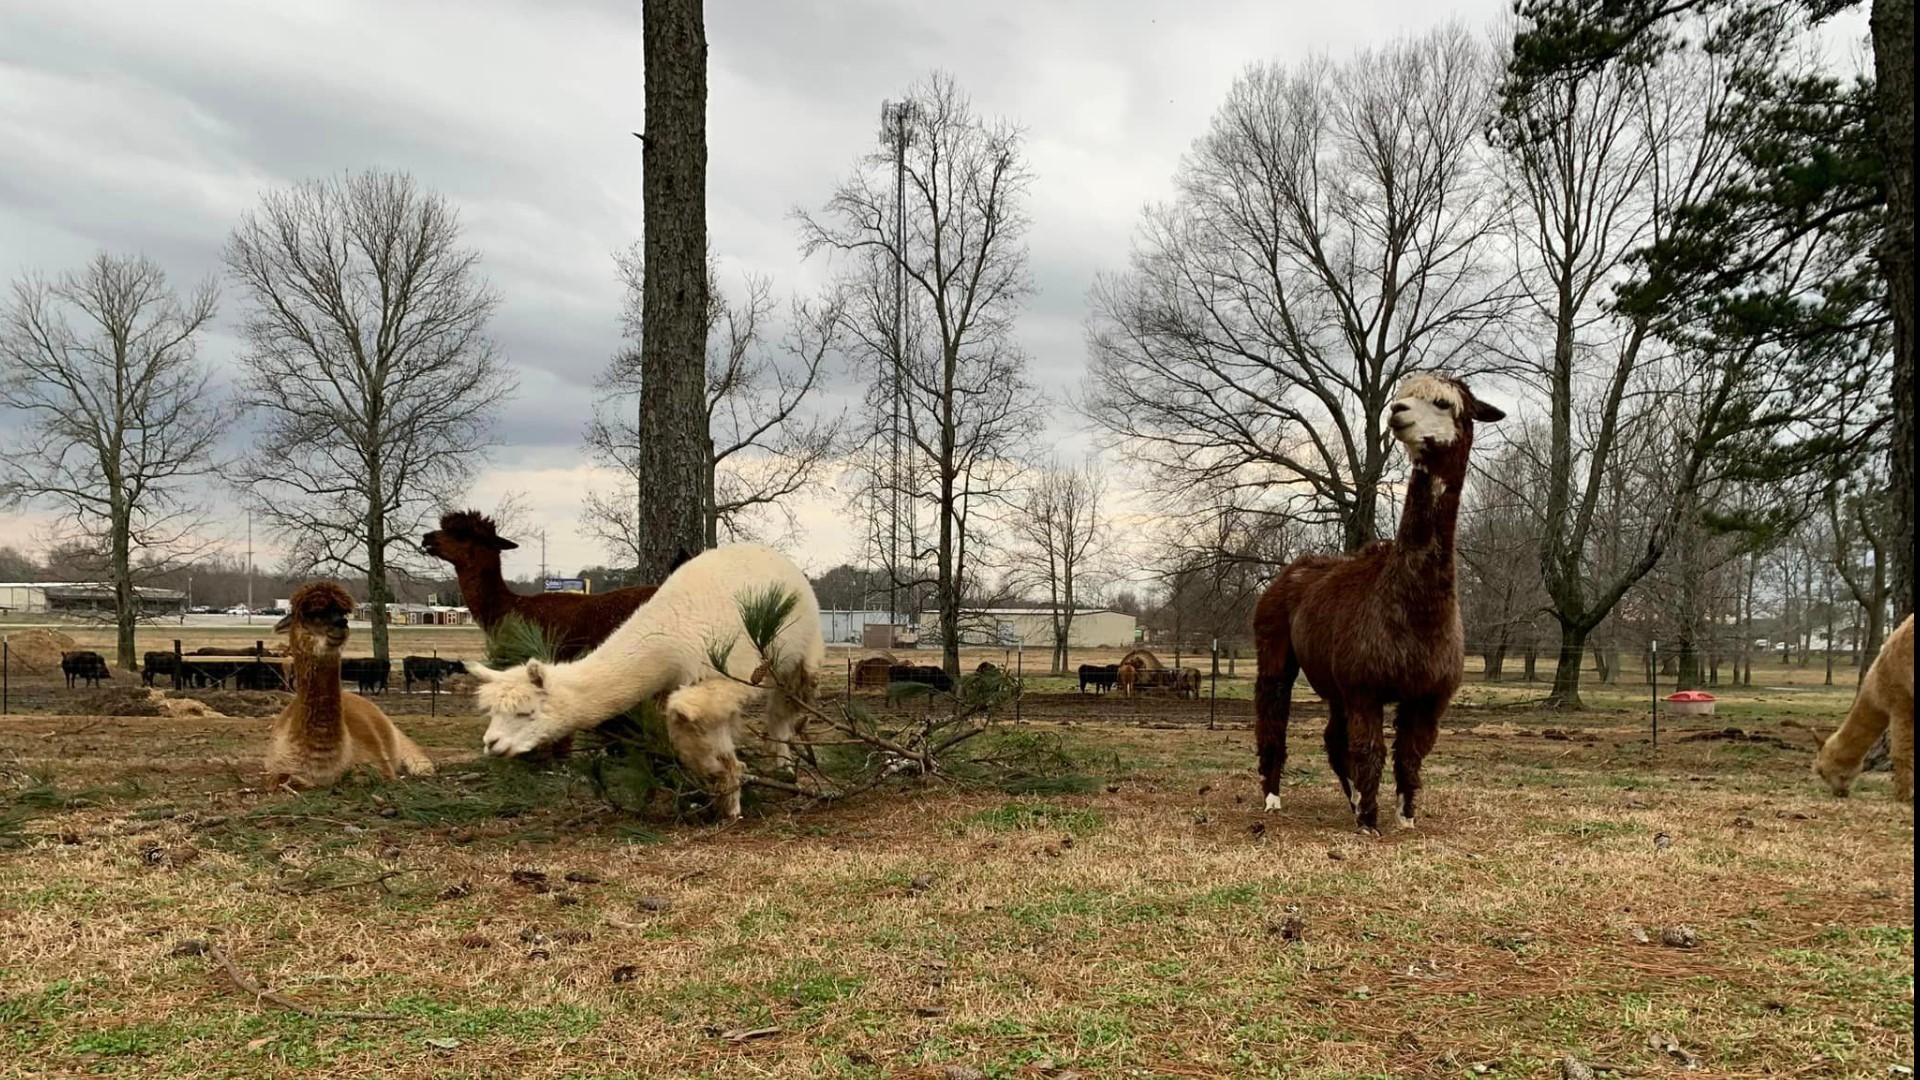 Have a live Christmas tree you want to recycle? These Athens alpacas want to help.